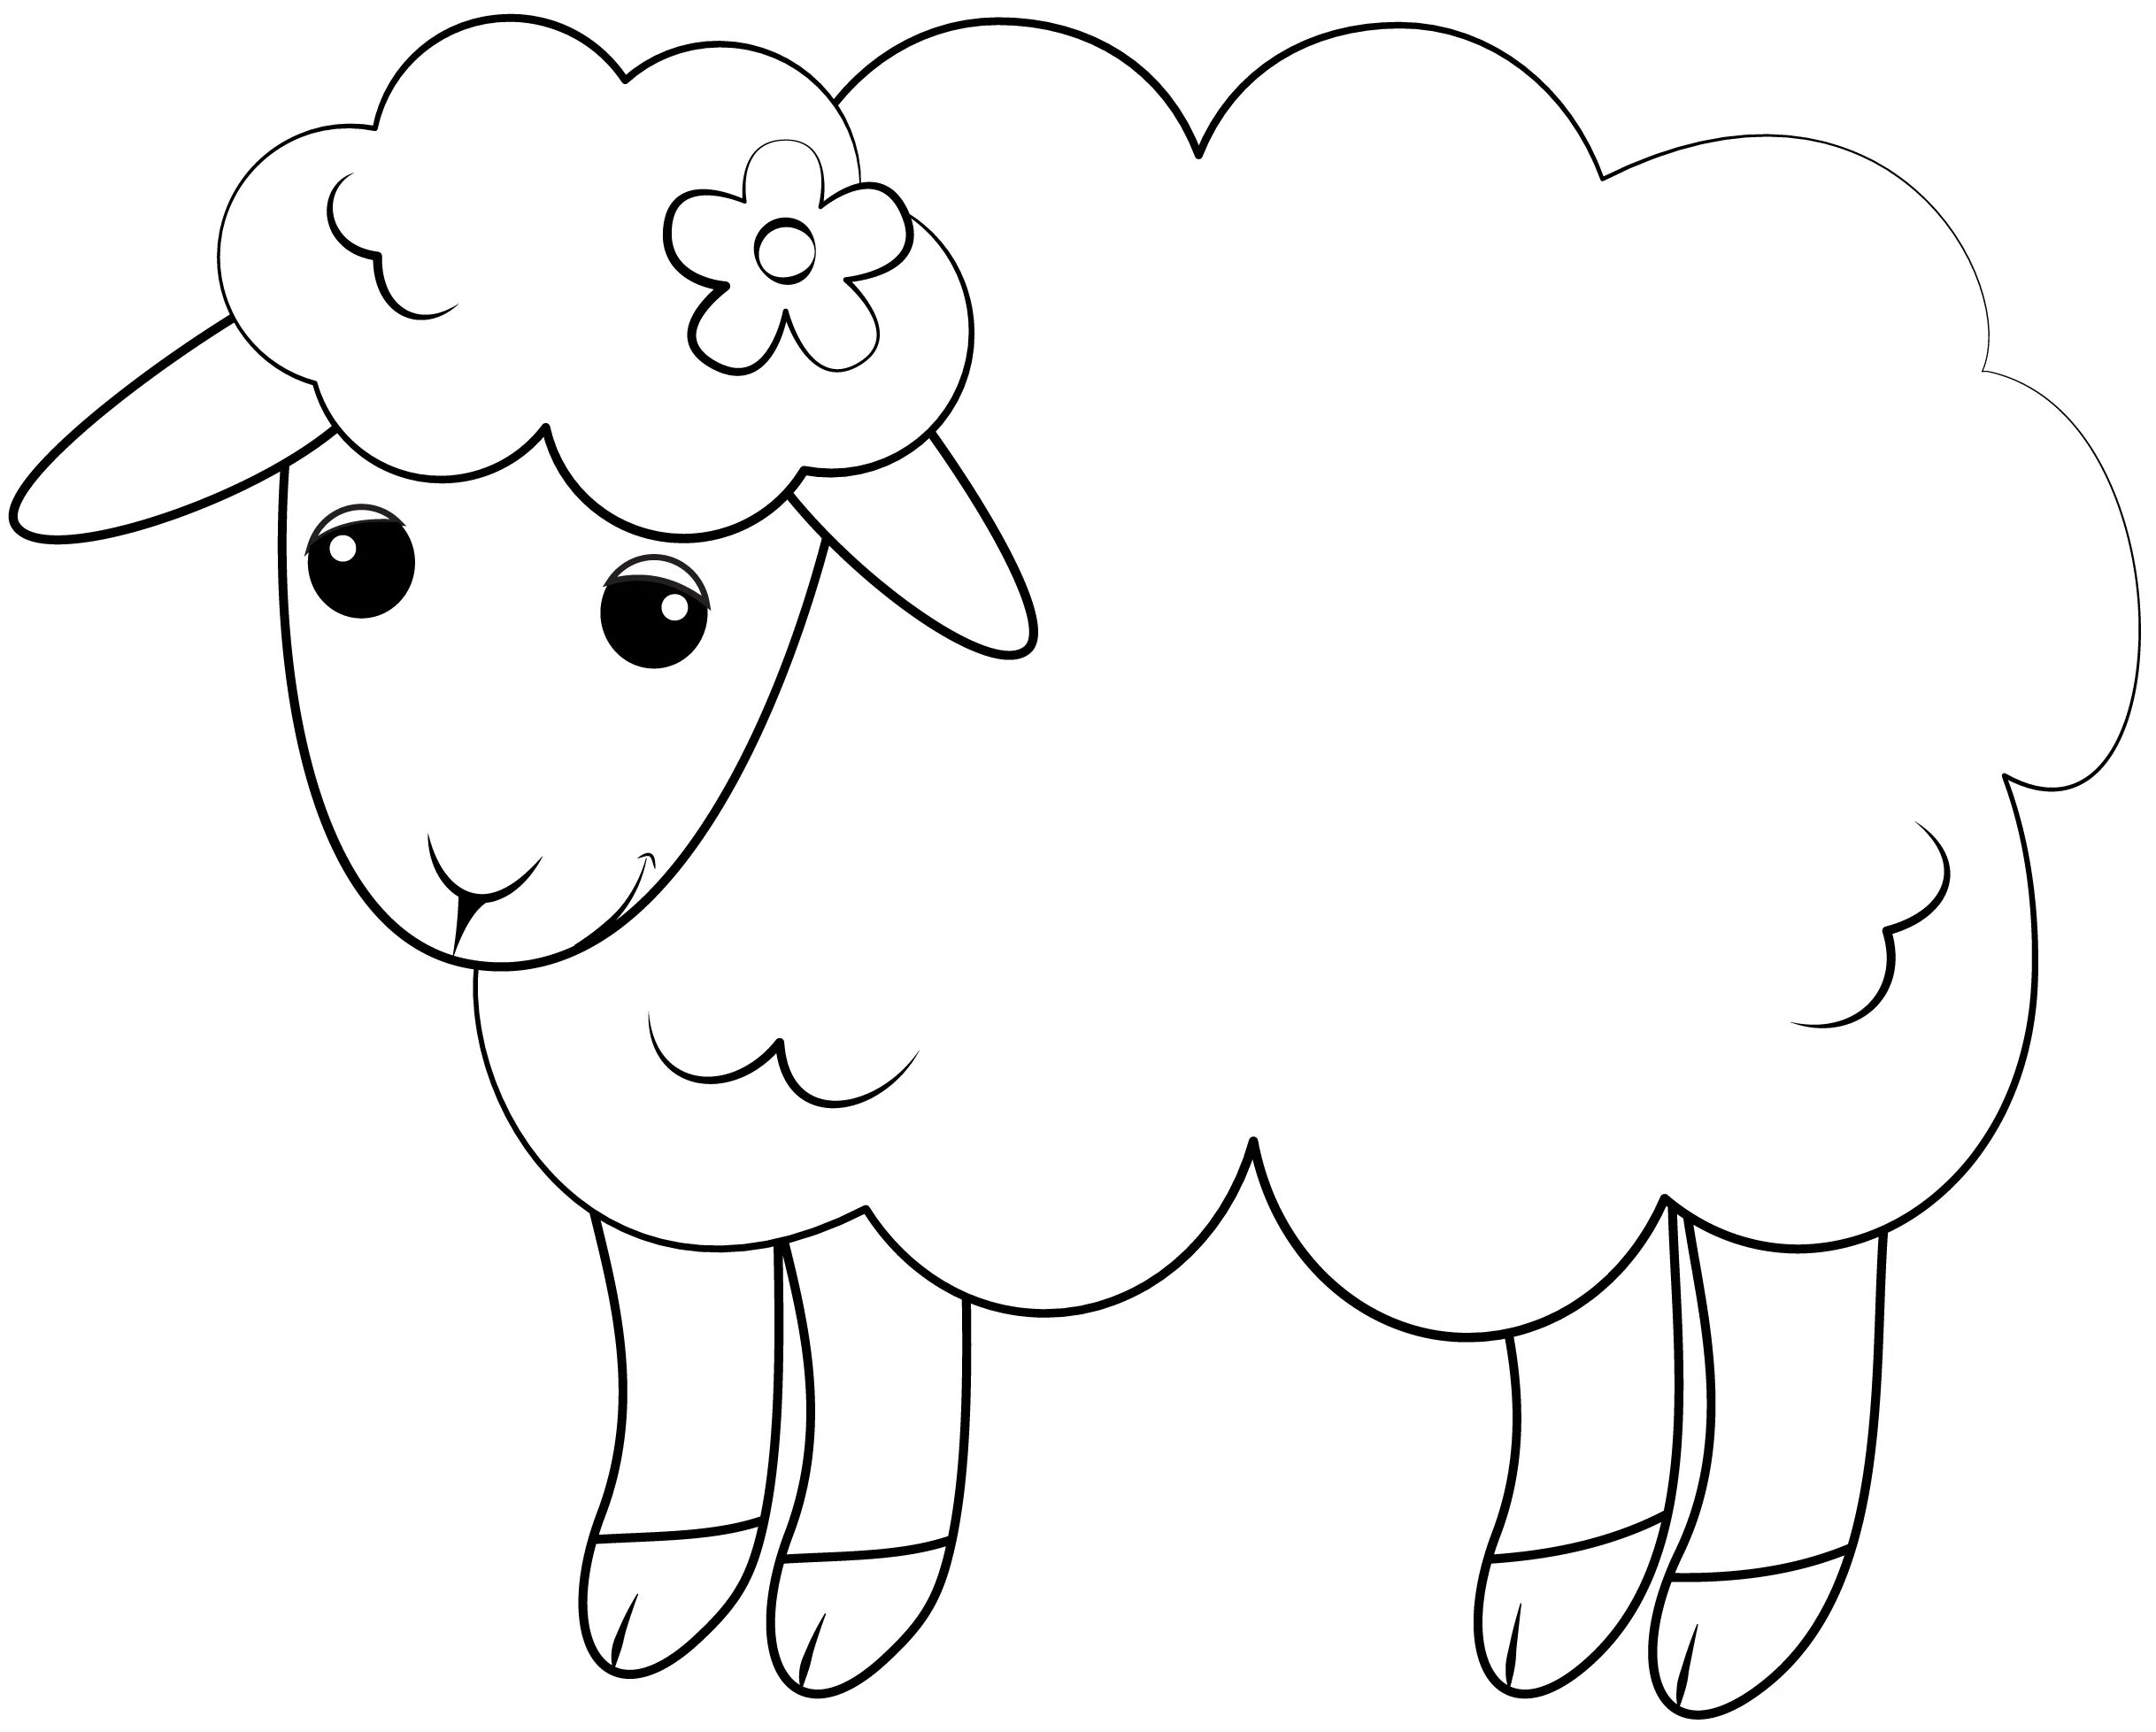 Furry lamb coloring book for children 2-3 years old